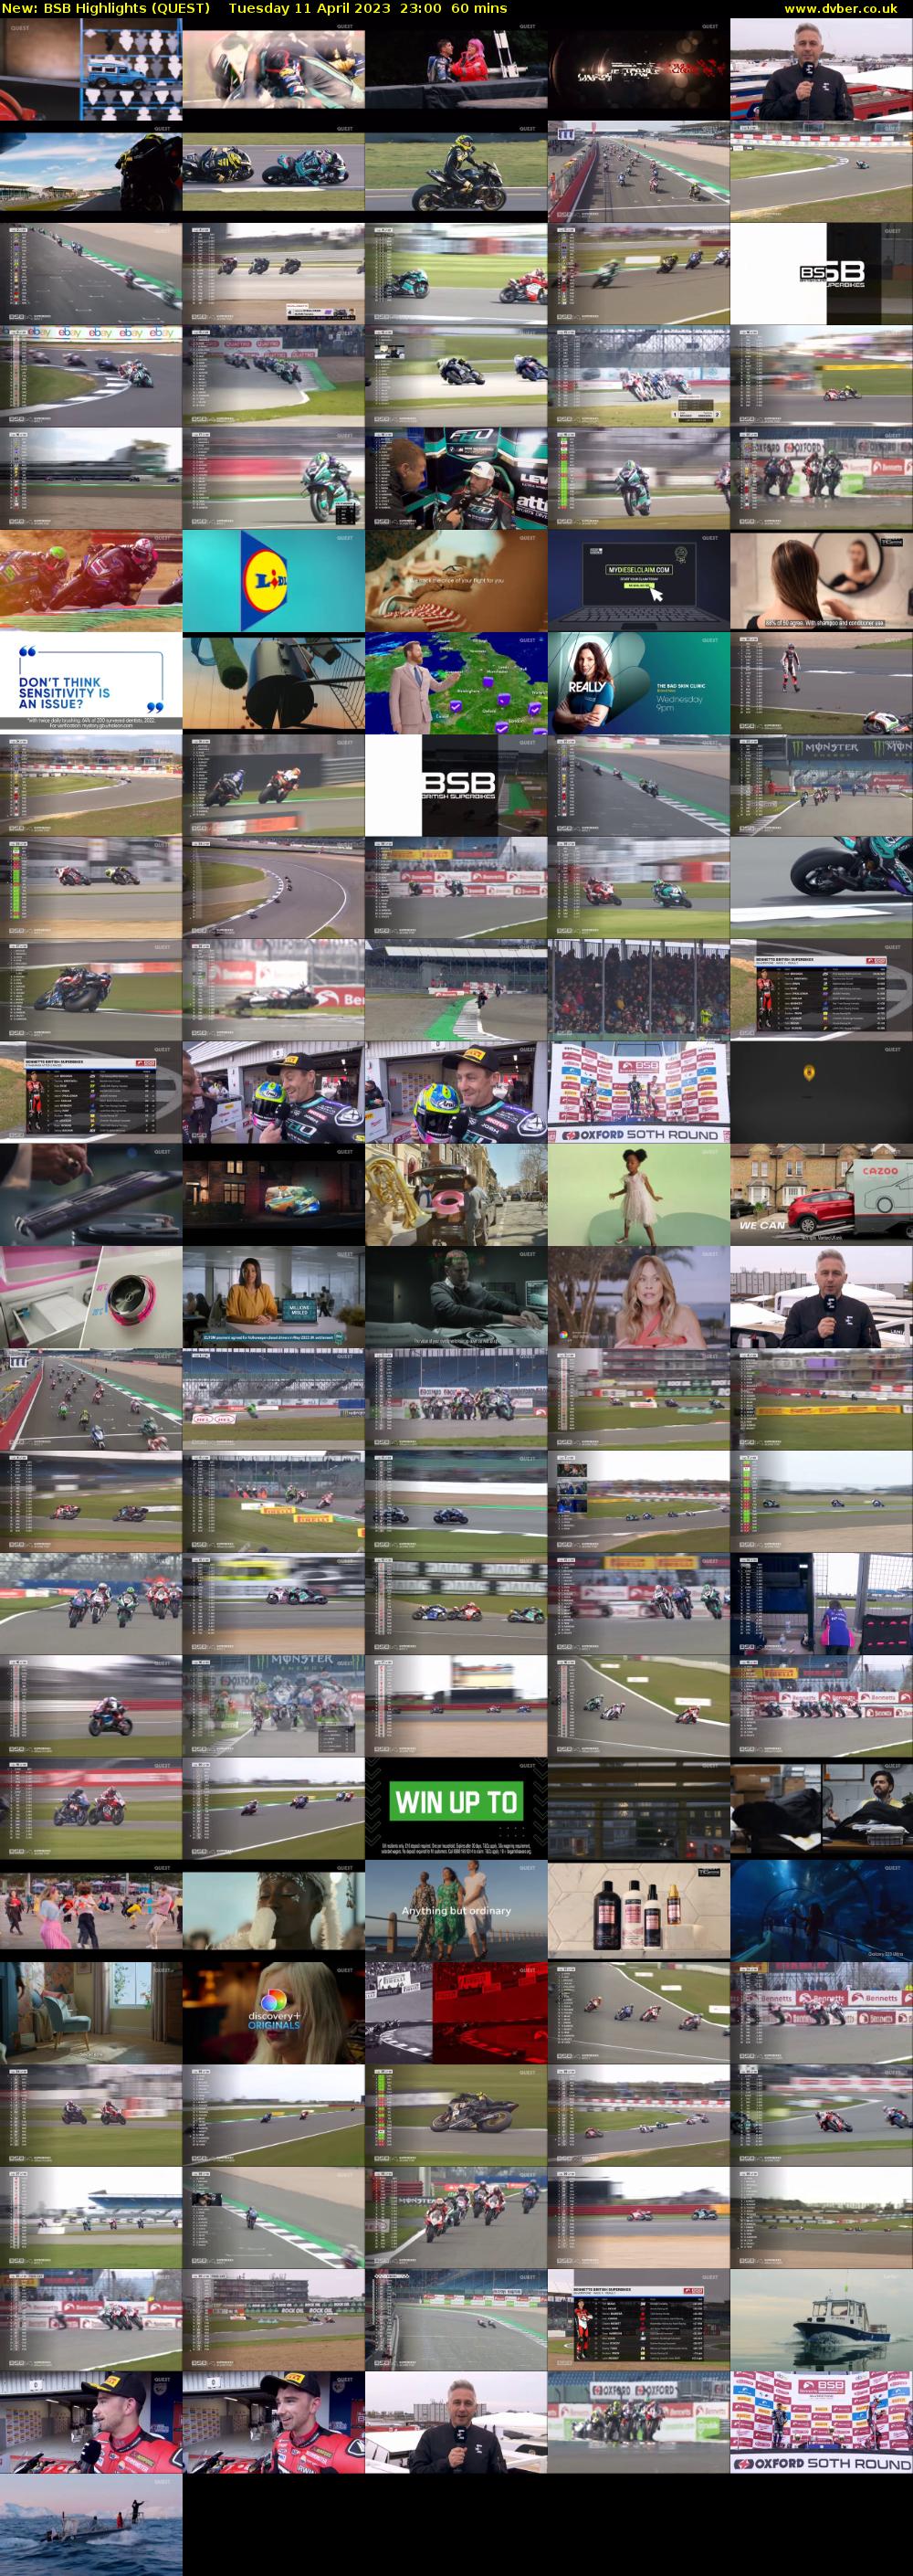 BSB Highlights (QUEST) Tuesday 11 April 2023 23:00 - 00:00